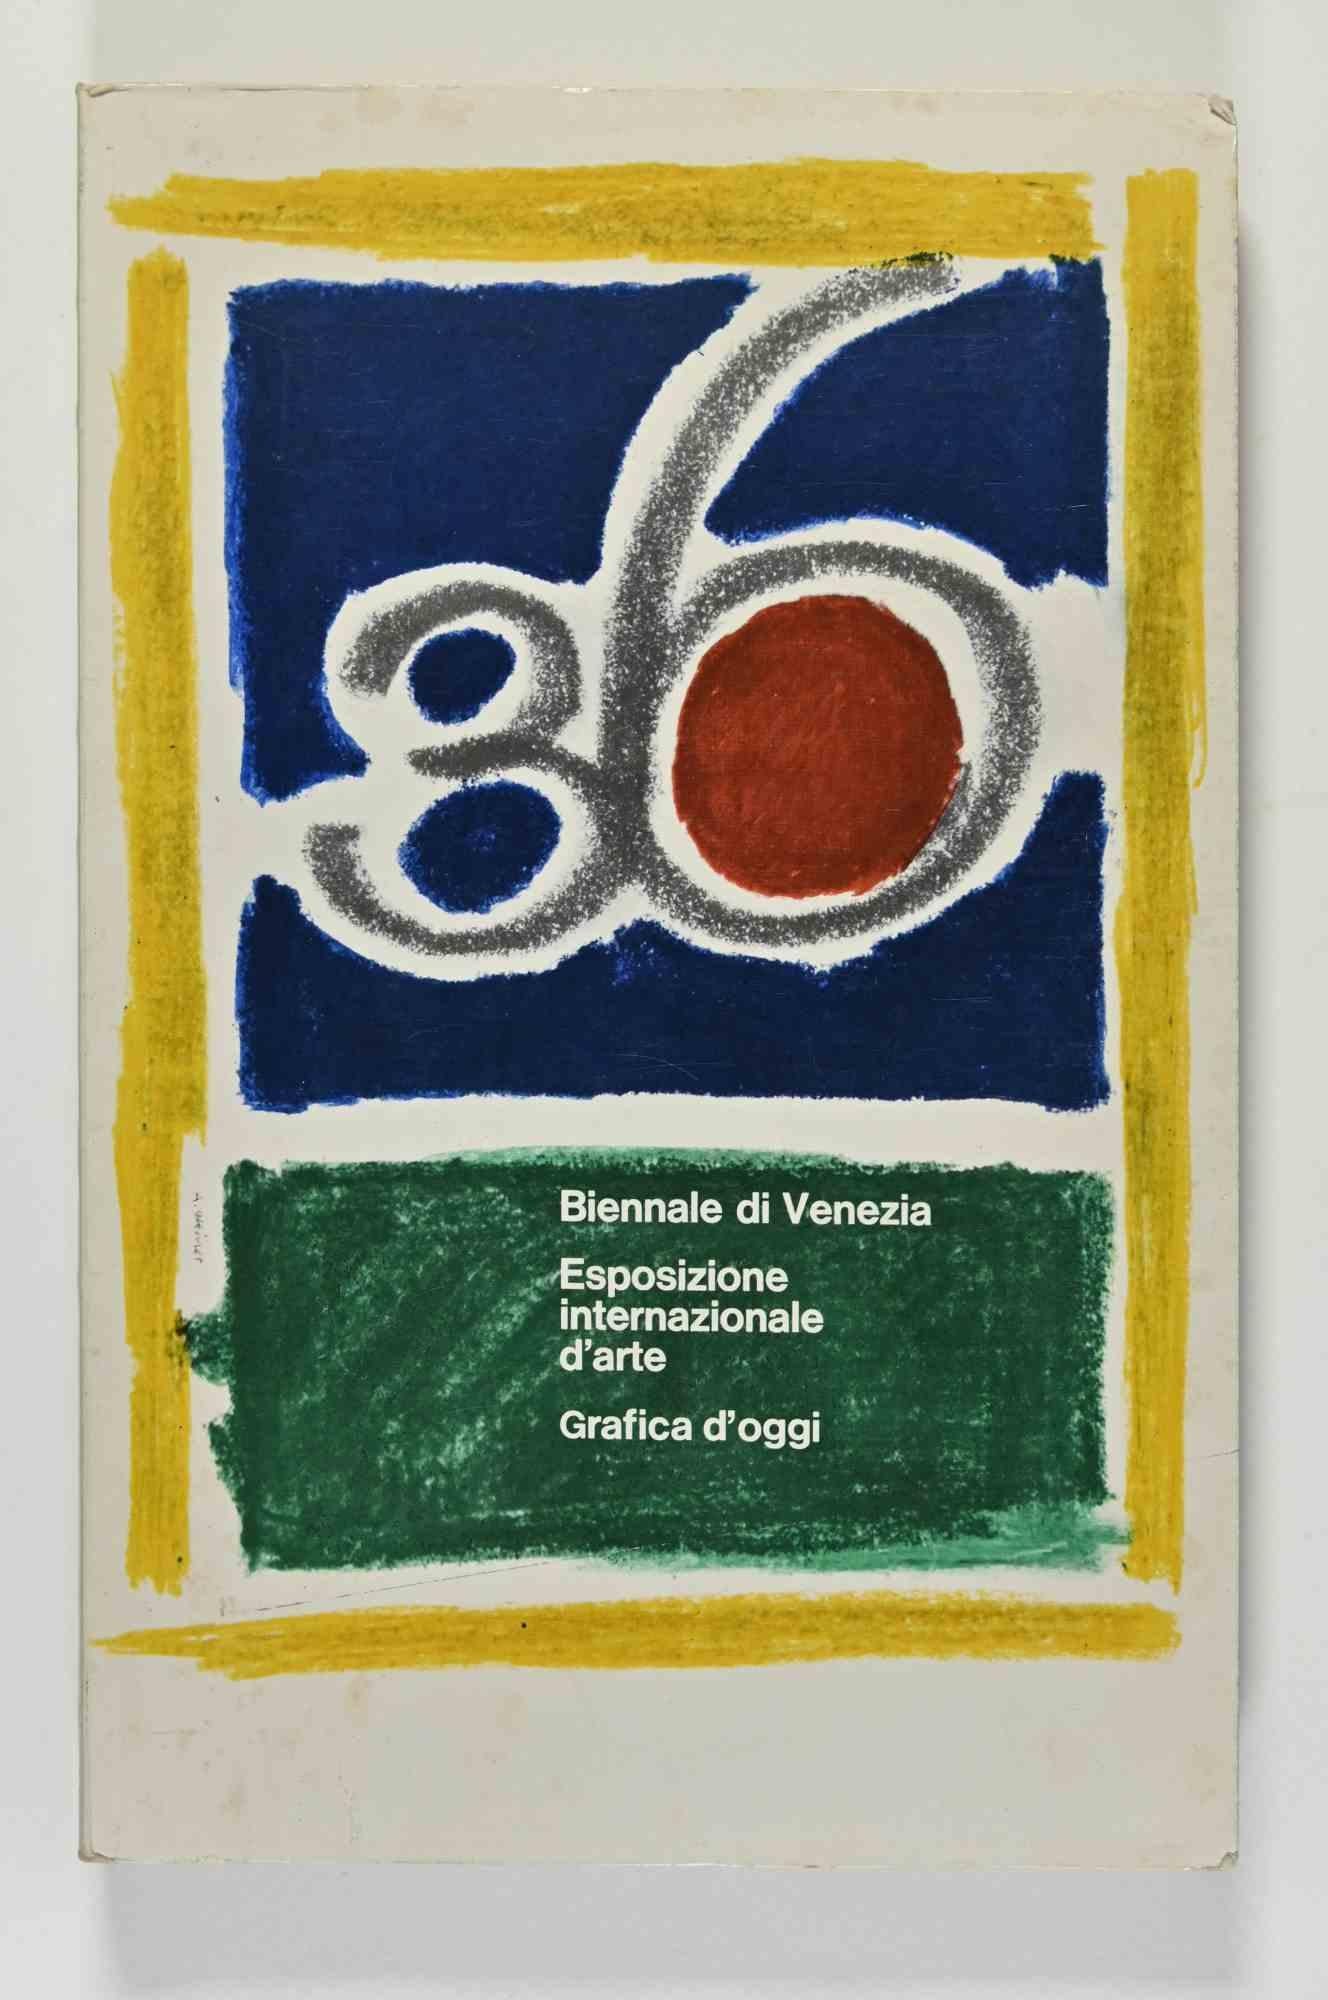 Venice Biennale - International art exhibition is a catalogue of venice Biennale, 1972. 

Second Edition, 18 July, 1972.

Venice printing house, 1972. 

Good conditions. ury he concentrated more on painting.